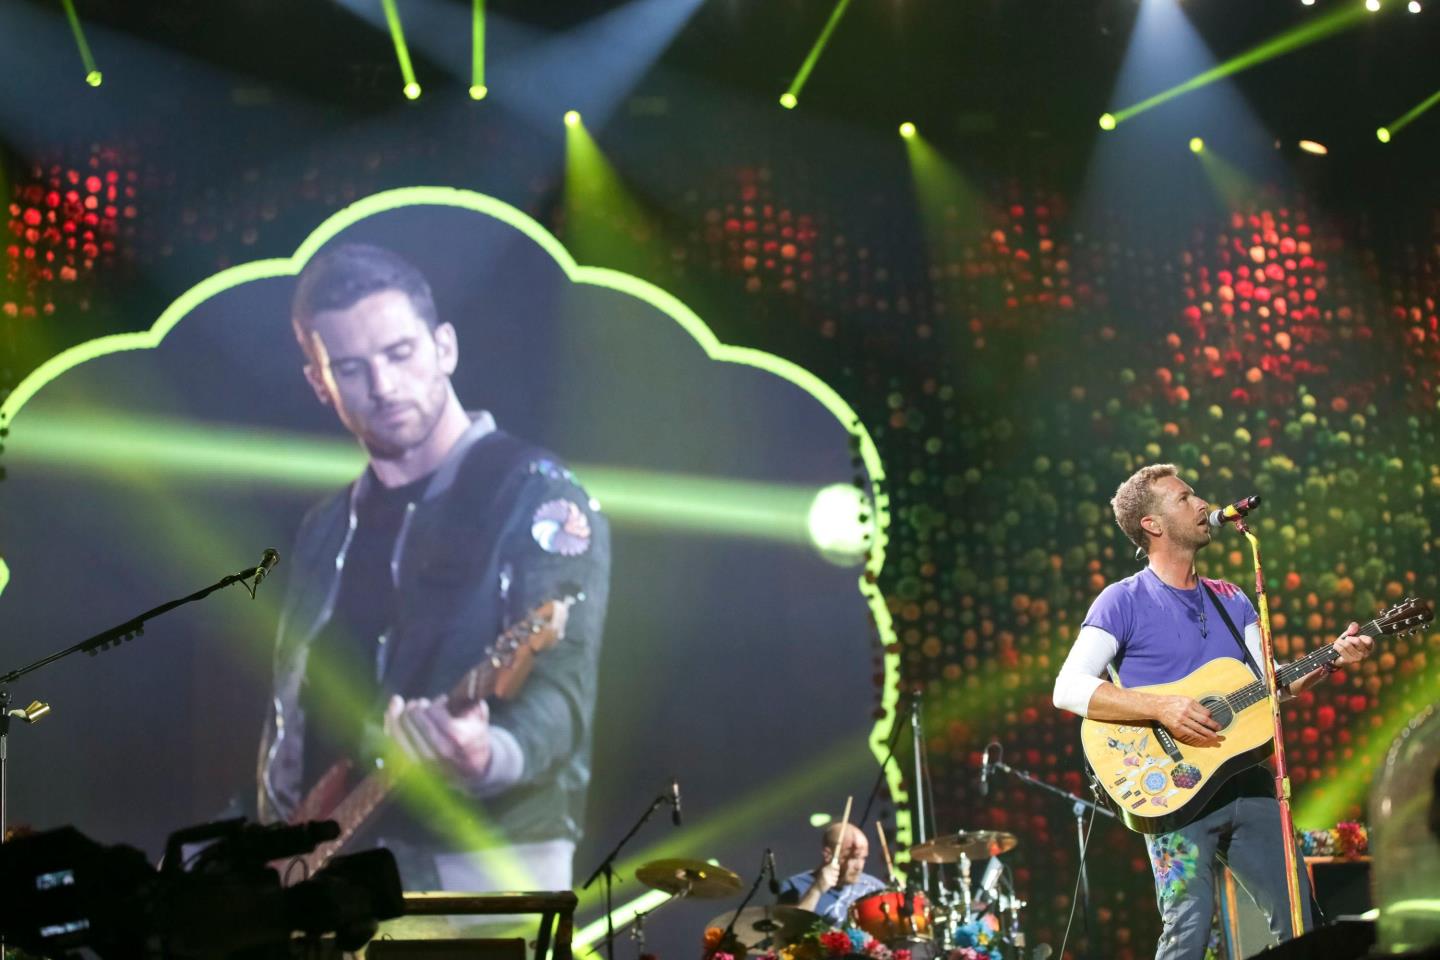 Guy Berryman's image is projected on stage behind lead singer Chris Martin during a concert in 2017.